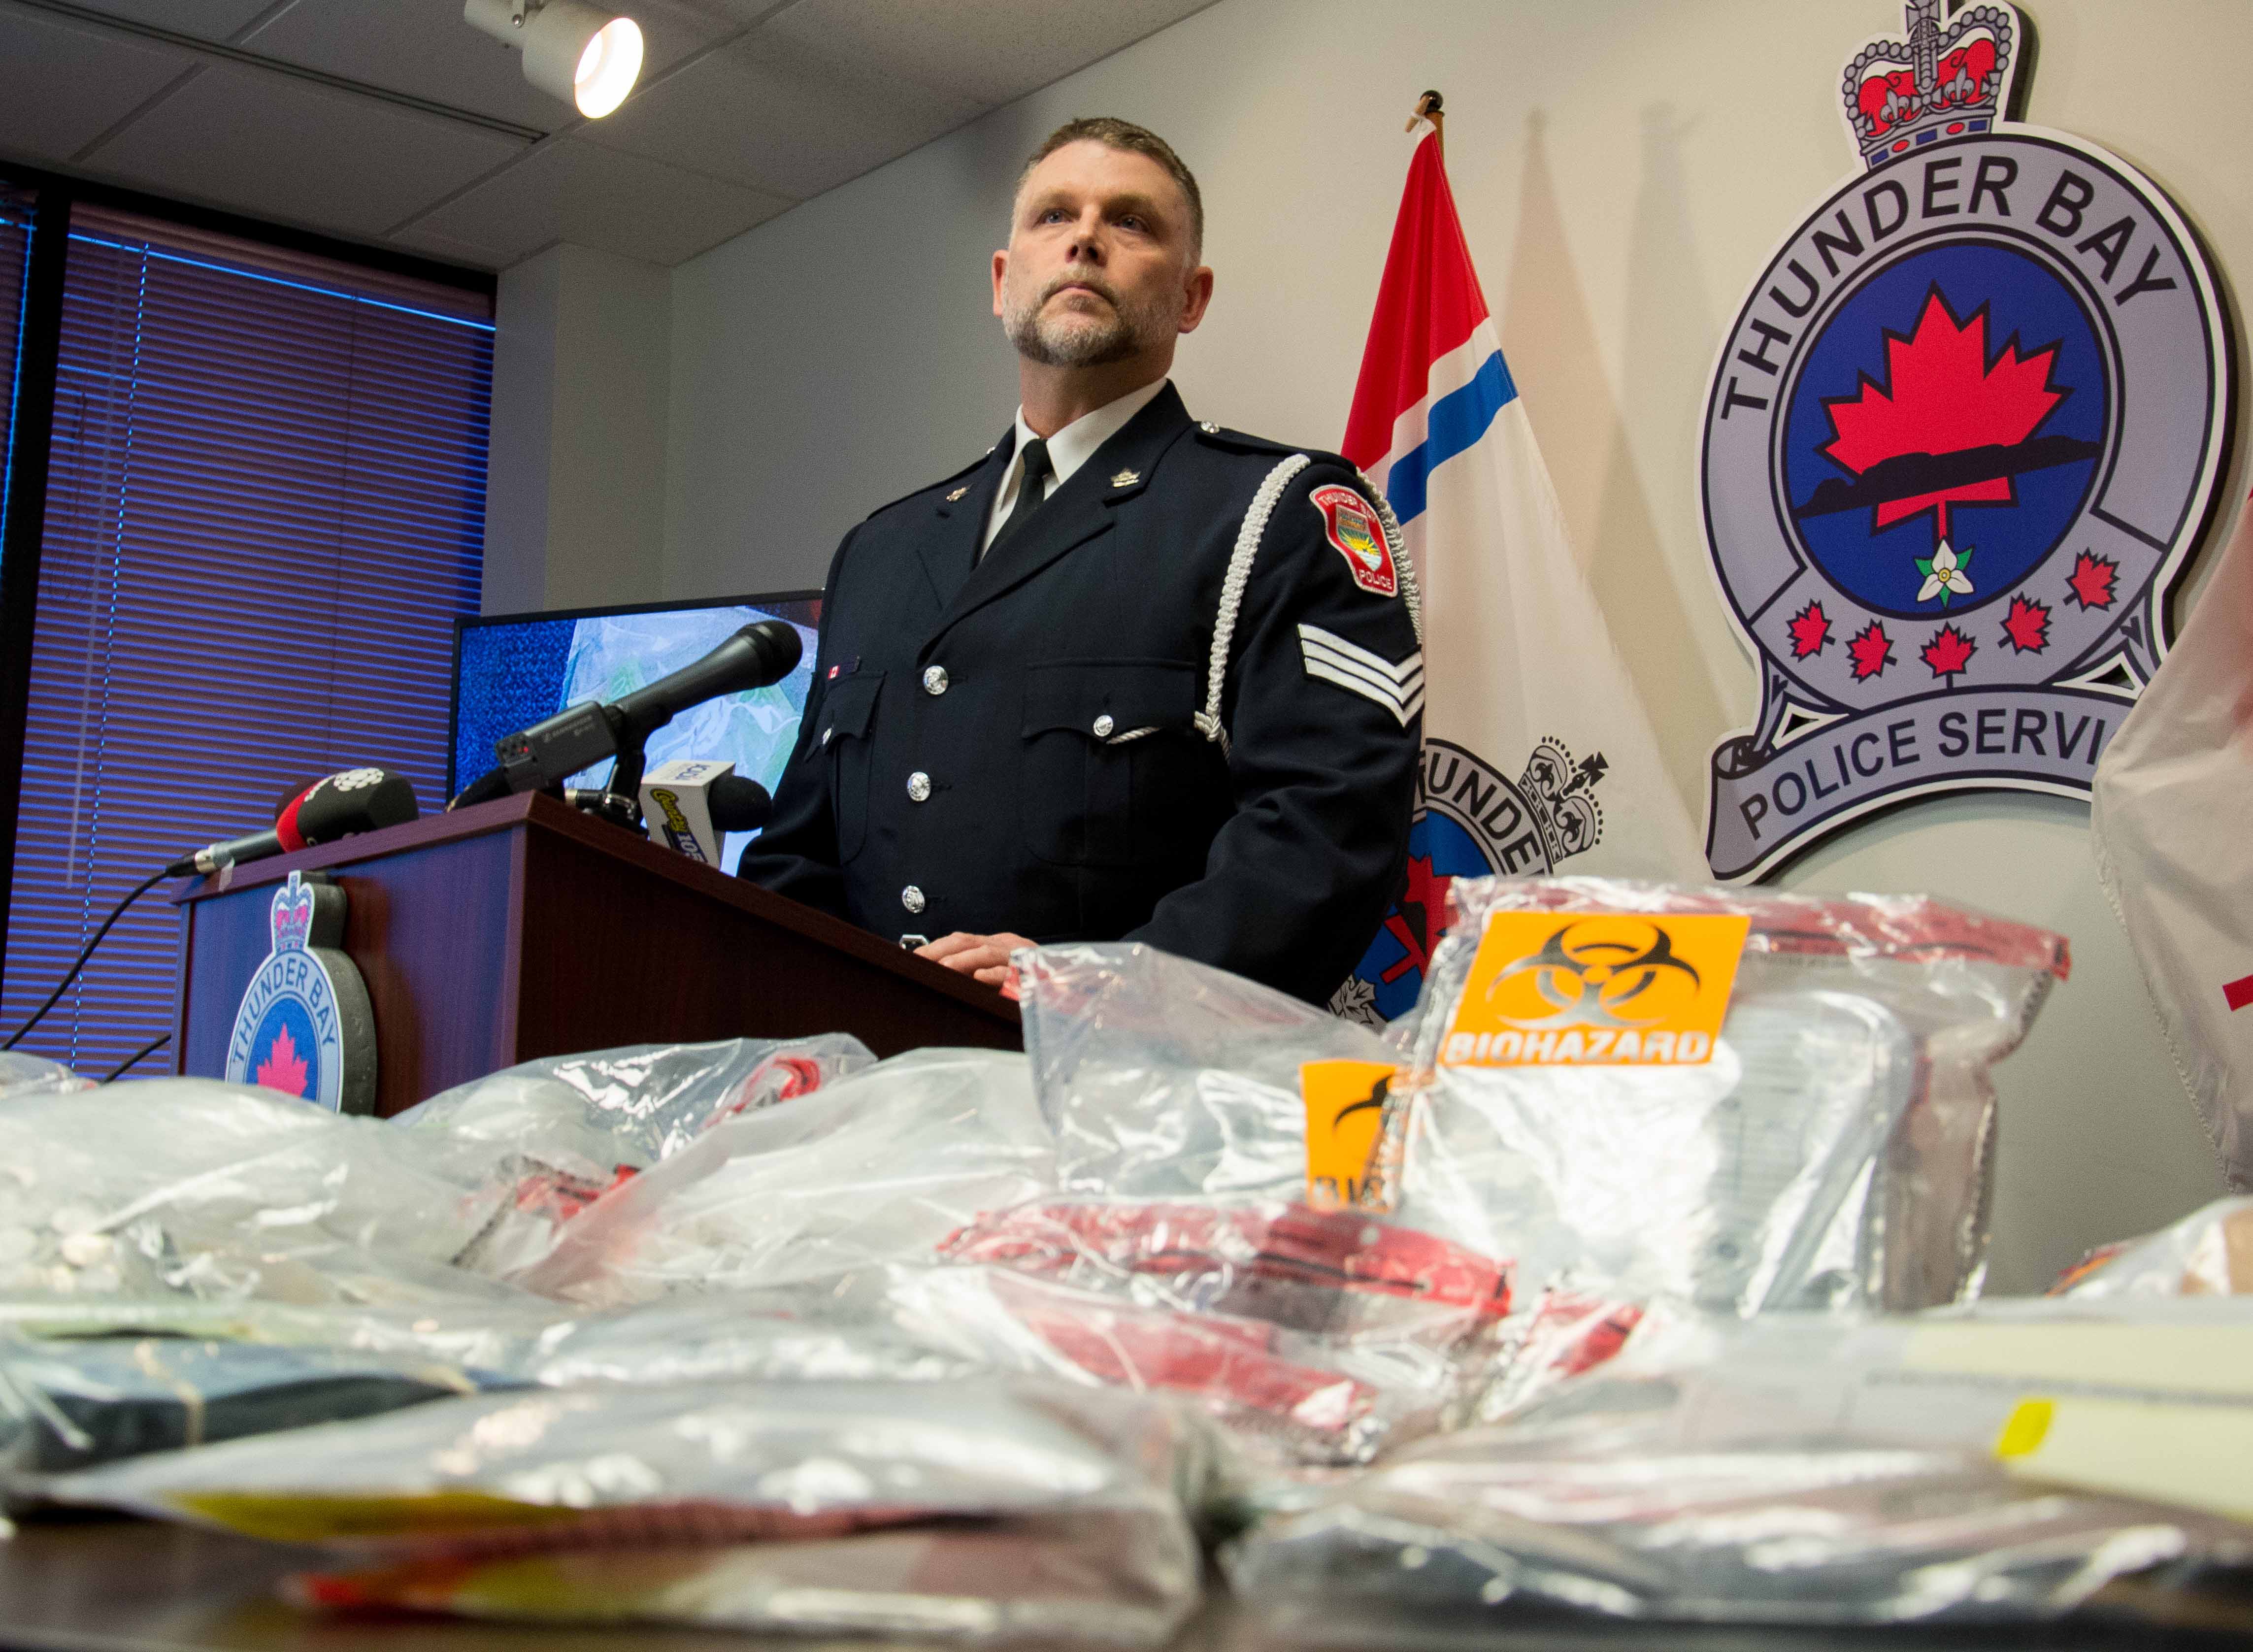 Project Trapper leads to 46 arrests, 15 accused from S.-Ont. with suspected gang ties